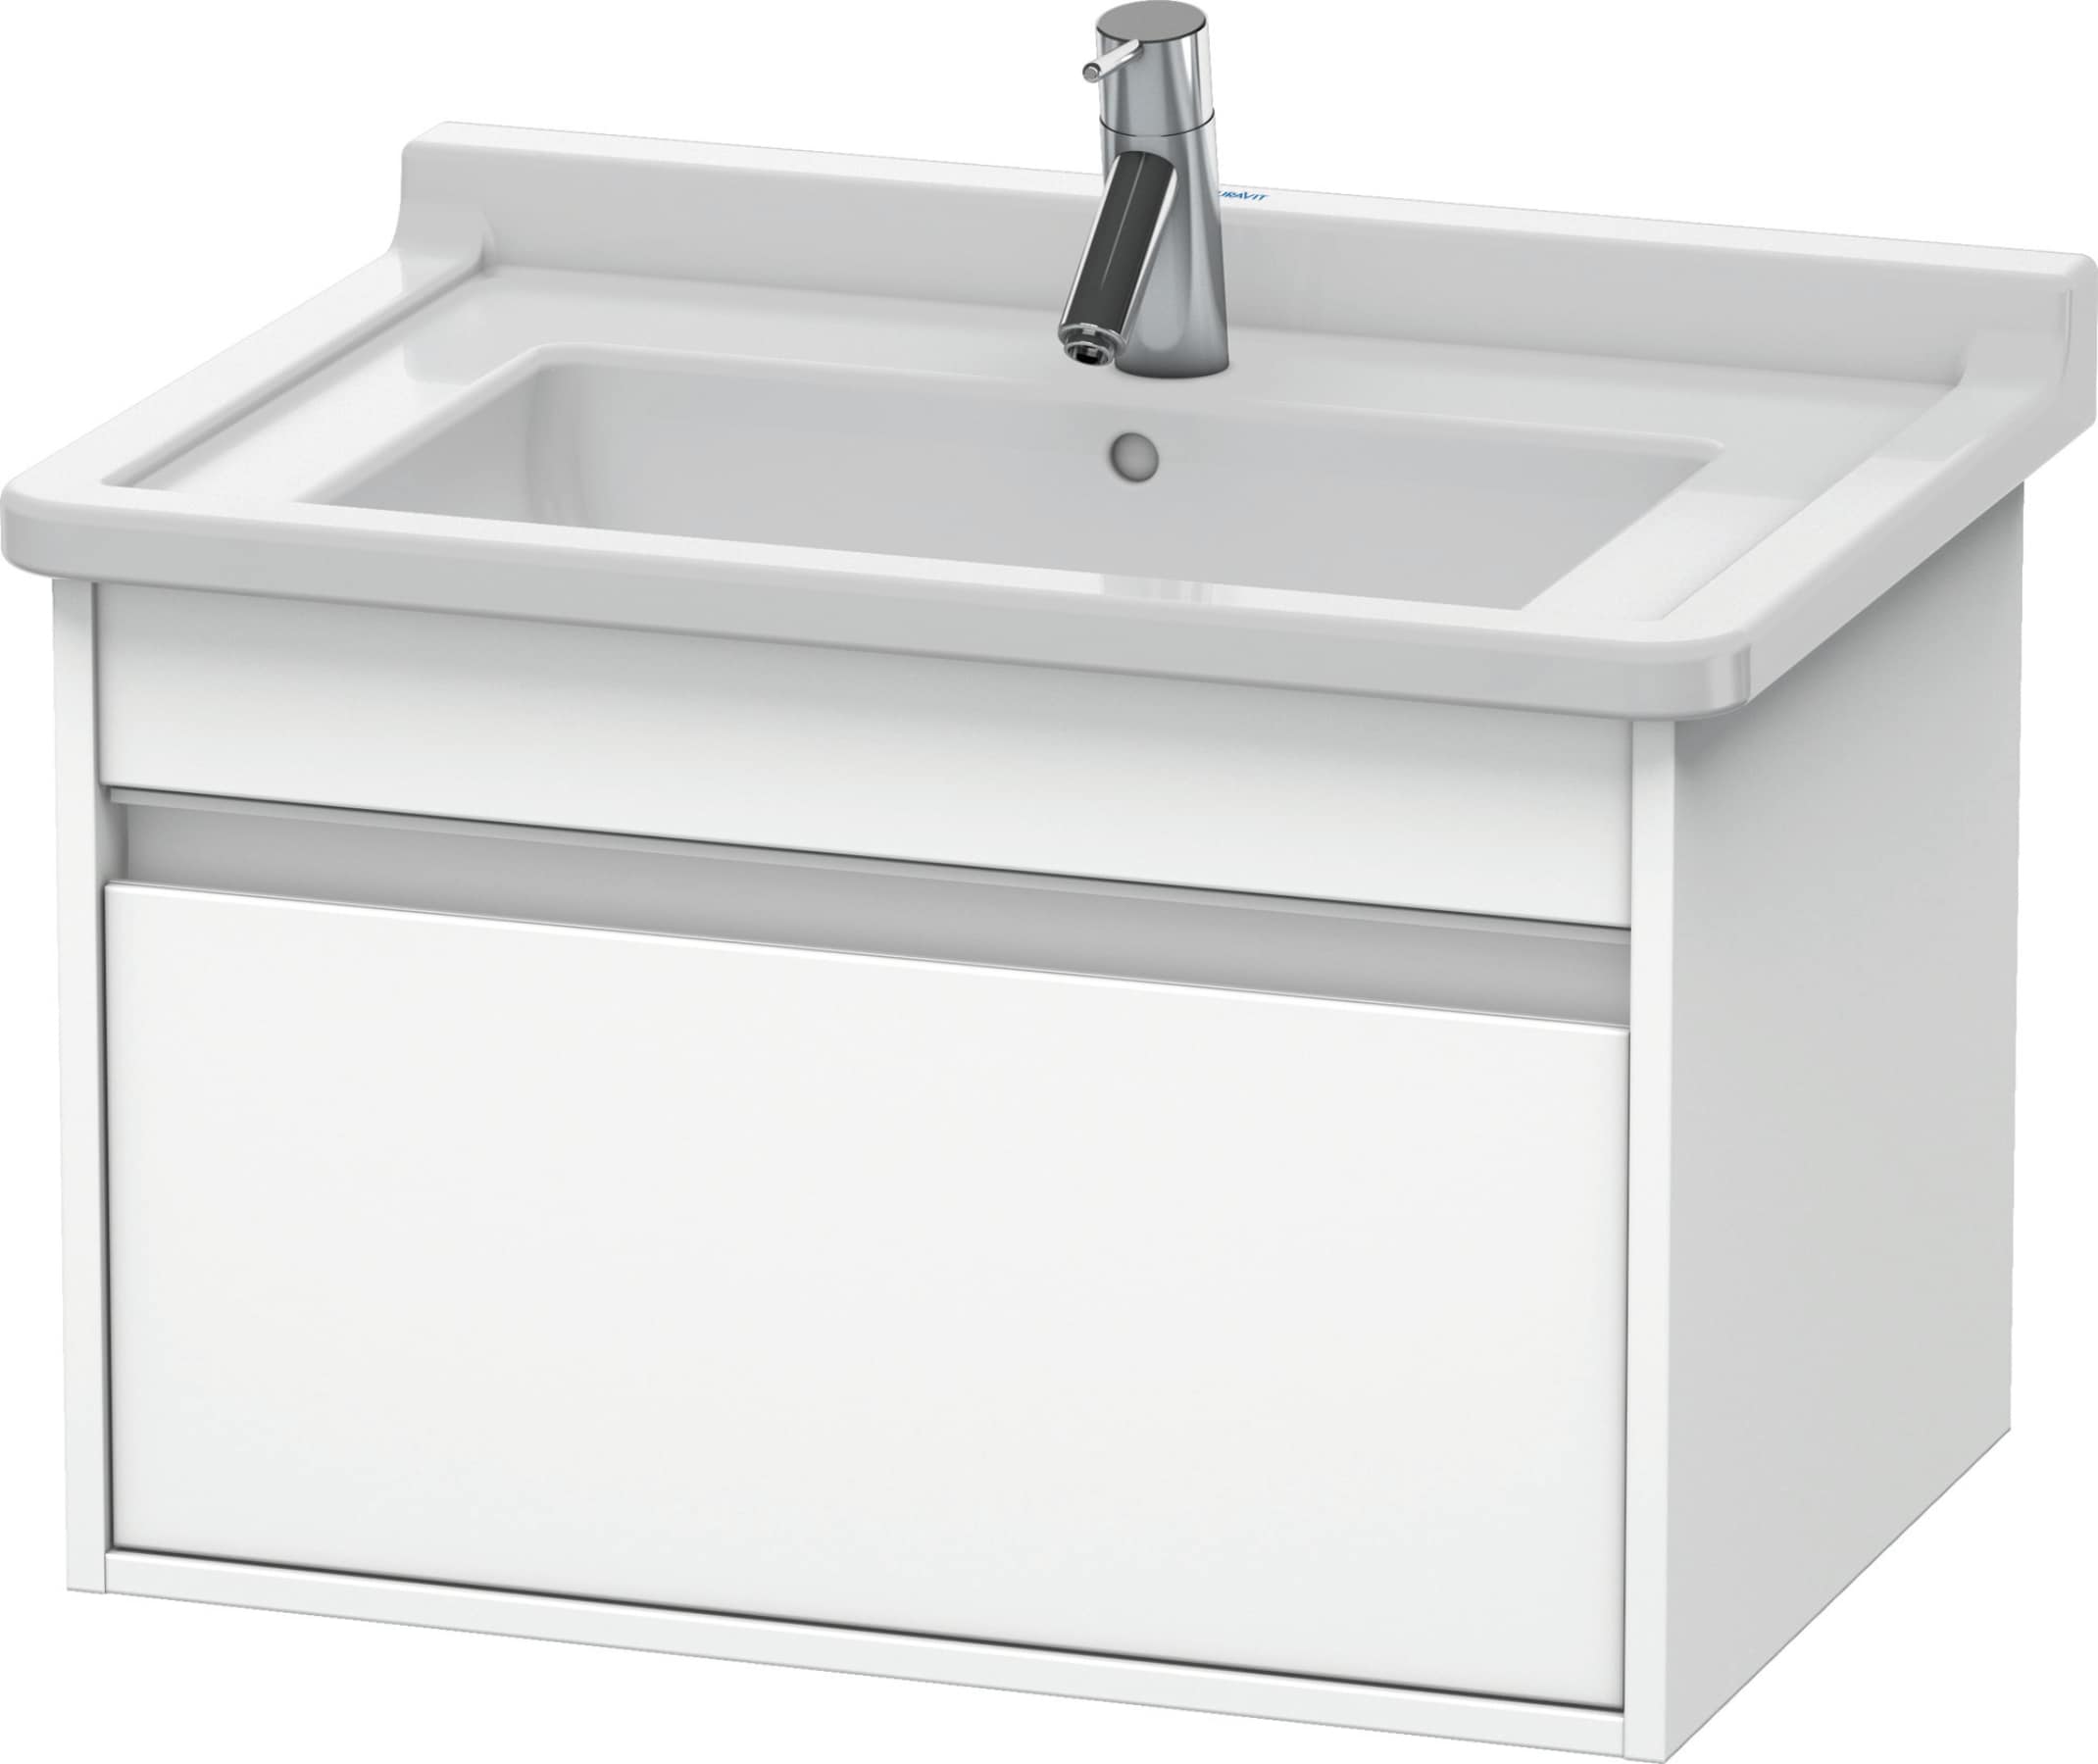 Ketho 31-in White Matte Bathroom Vanity Base Cabinet without Top | - Duravit KT666401818